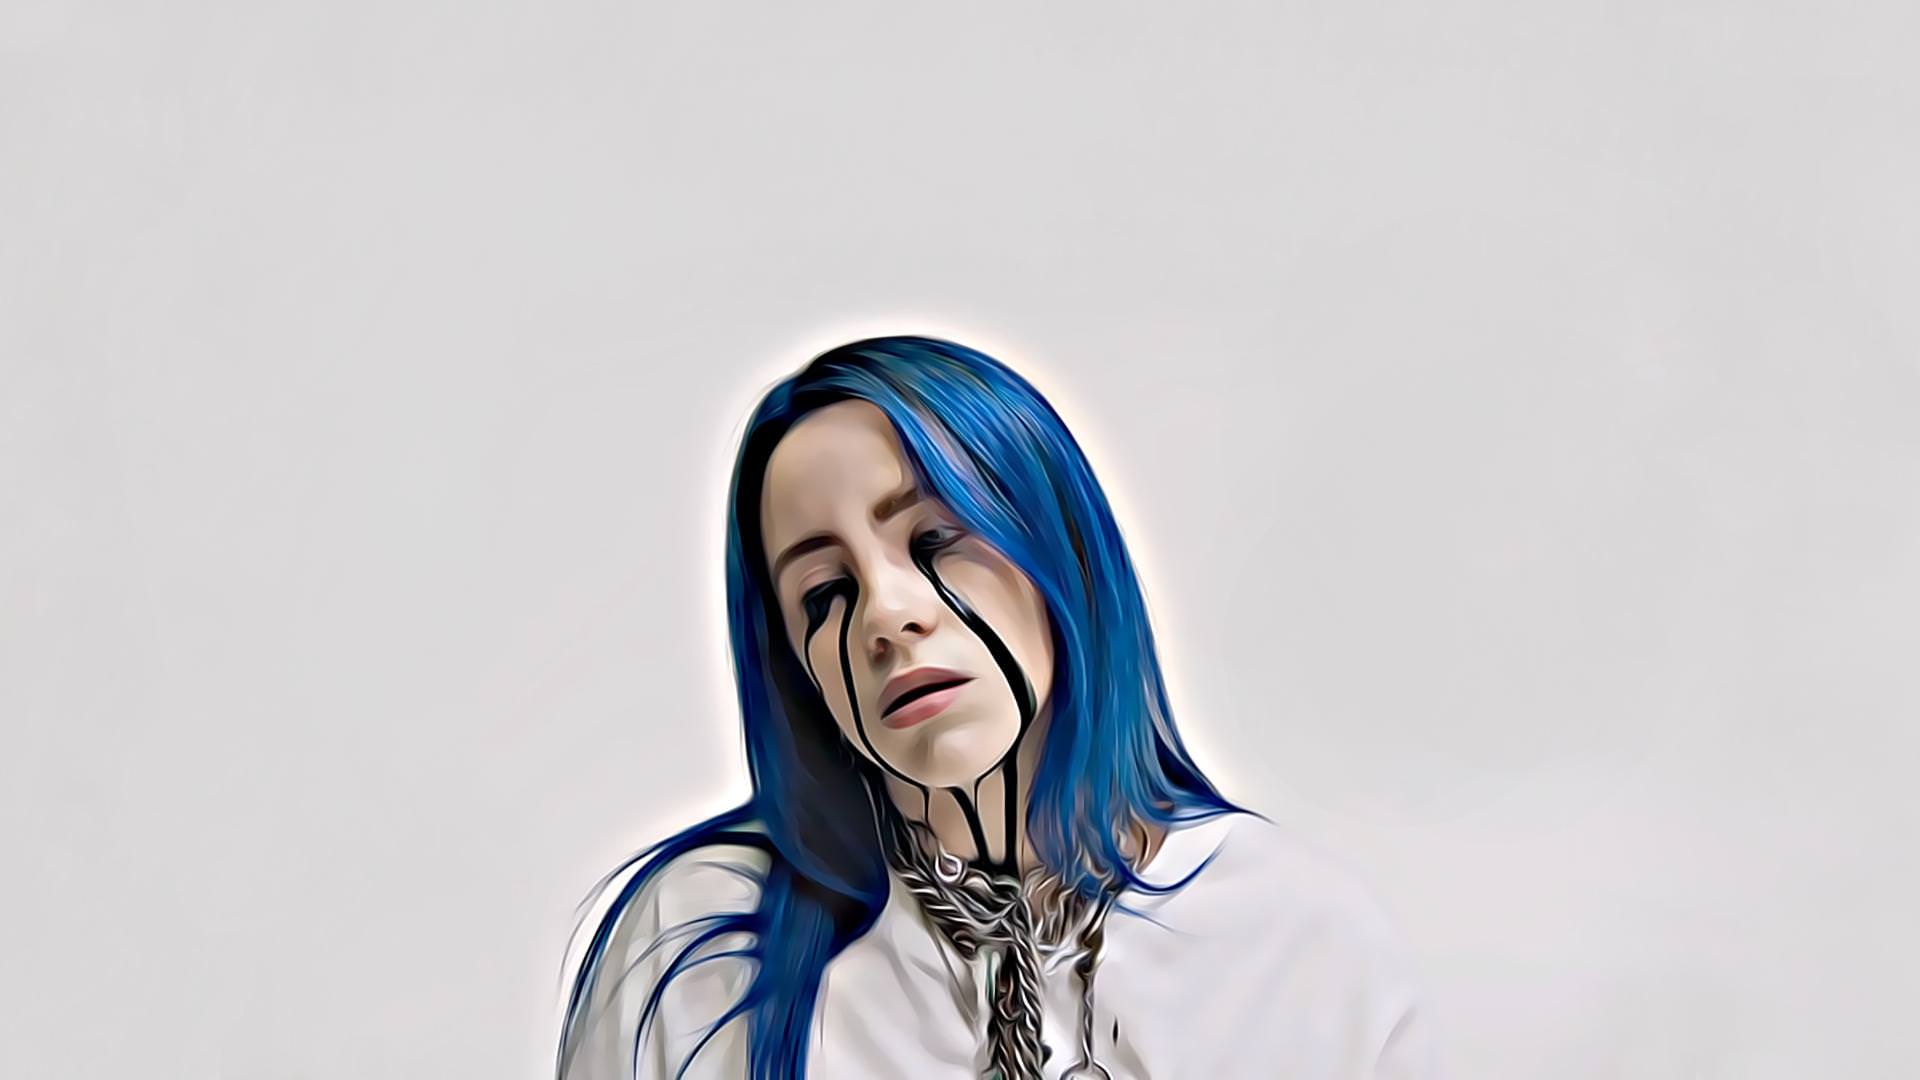 I made this from Billie Eilish's latest music video